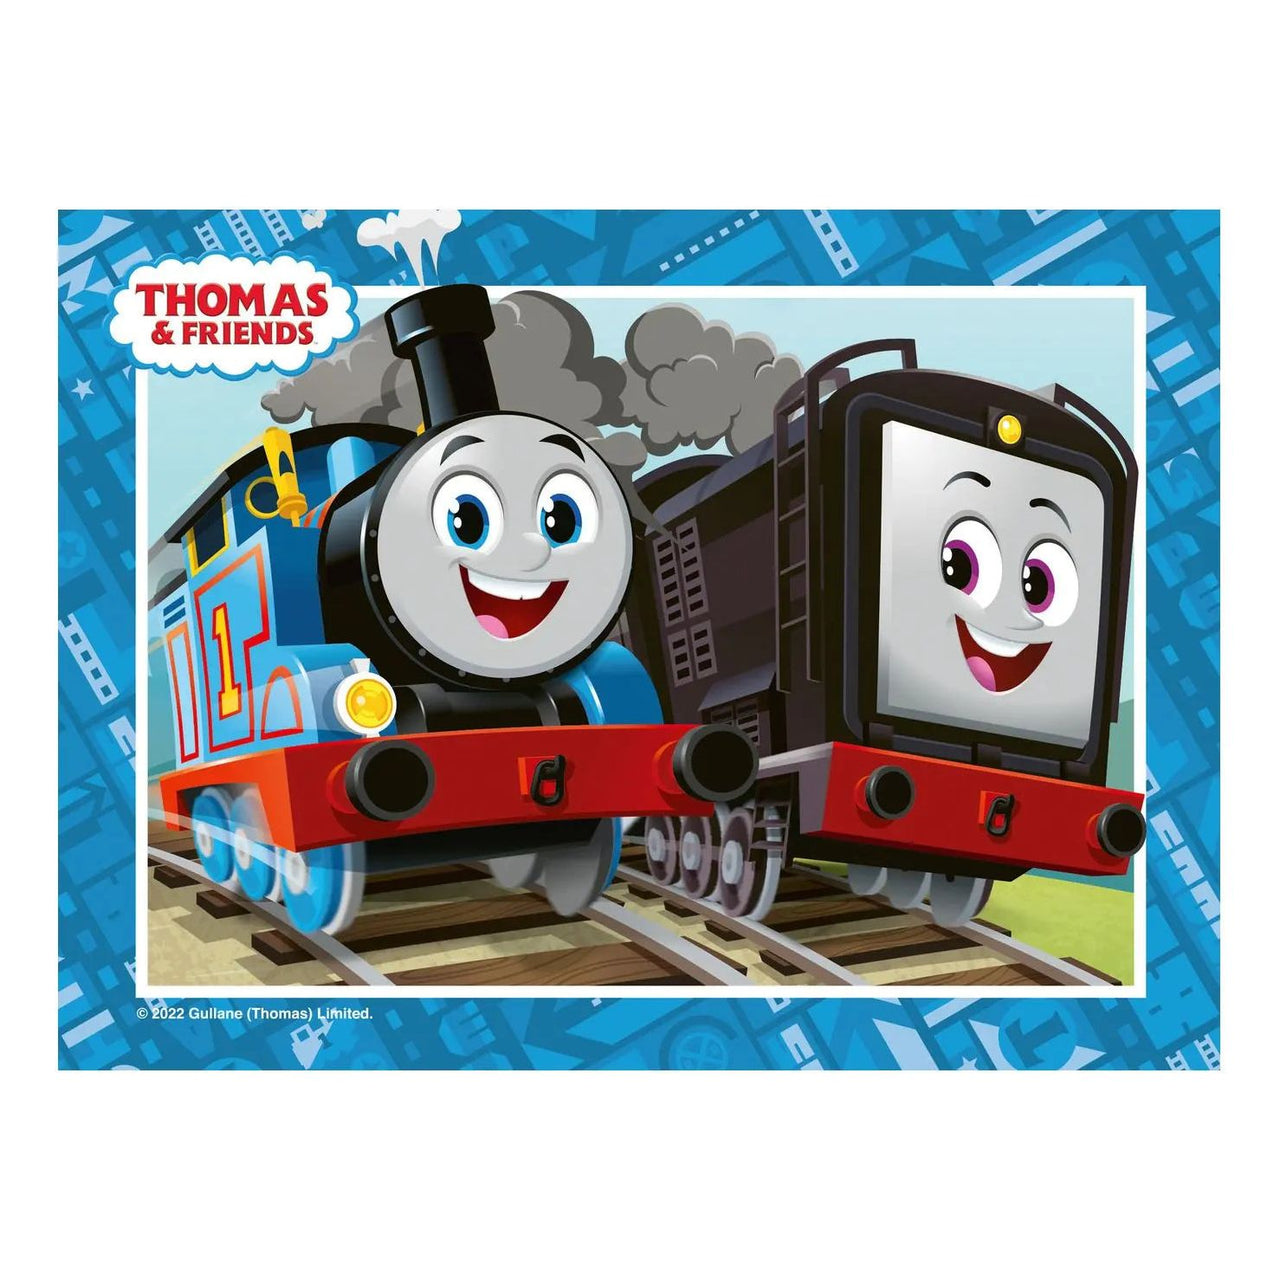 Thomas & Friends Fun Day Out 4 in a Box Jigsaw Puzzle Ravensburger